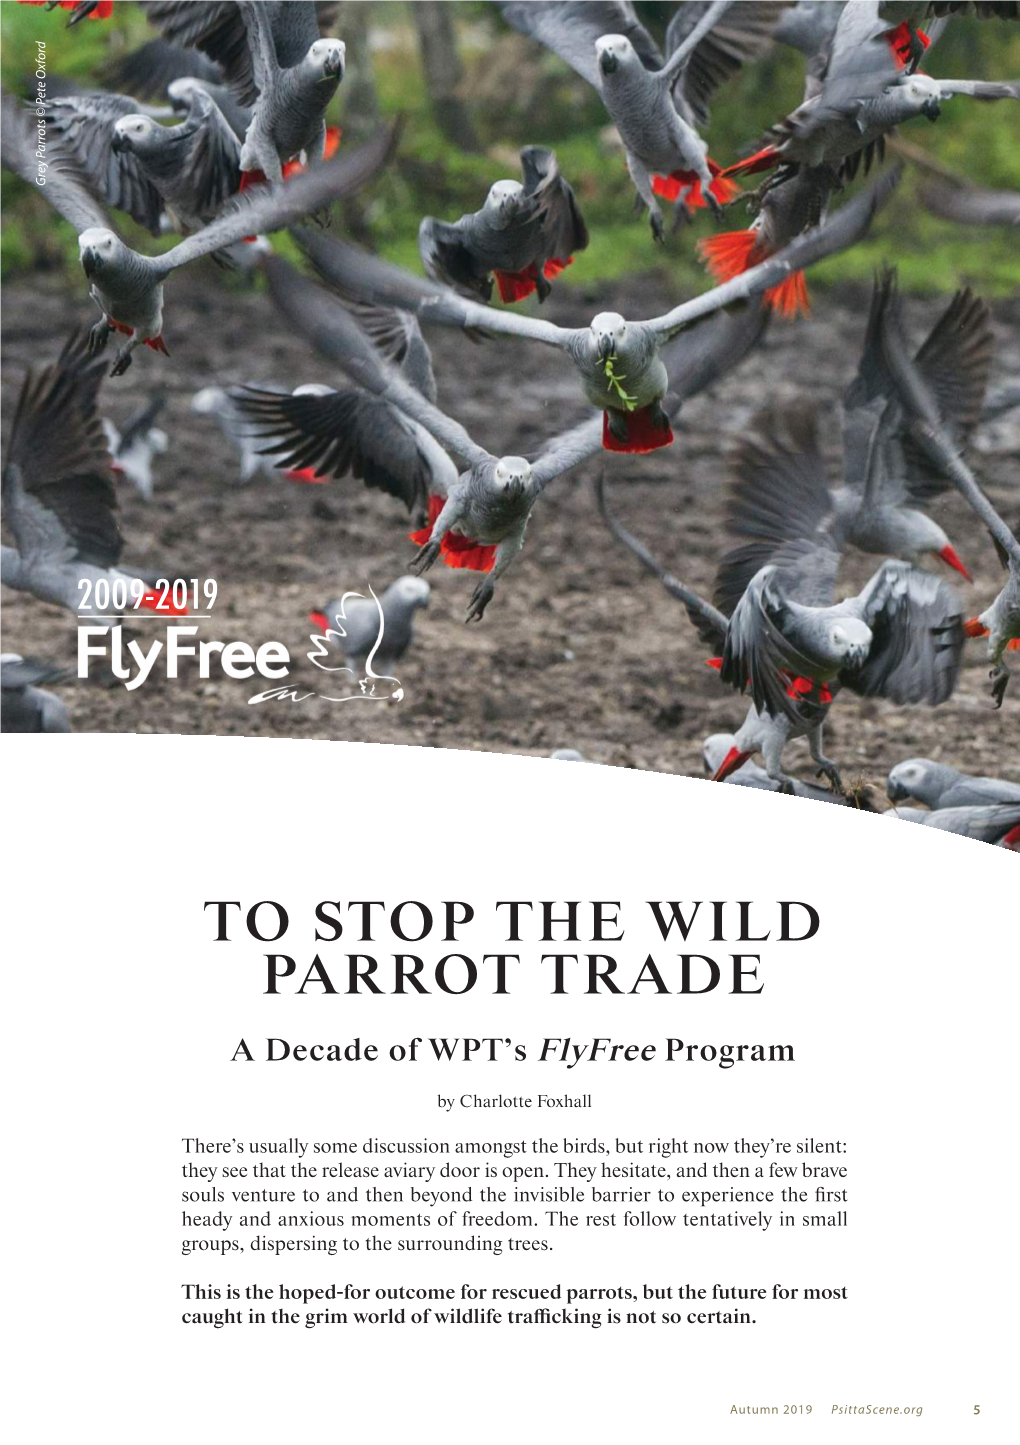 To Stop the Wild Parrot Trade